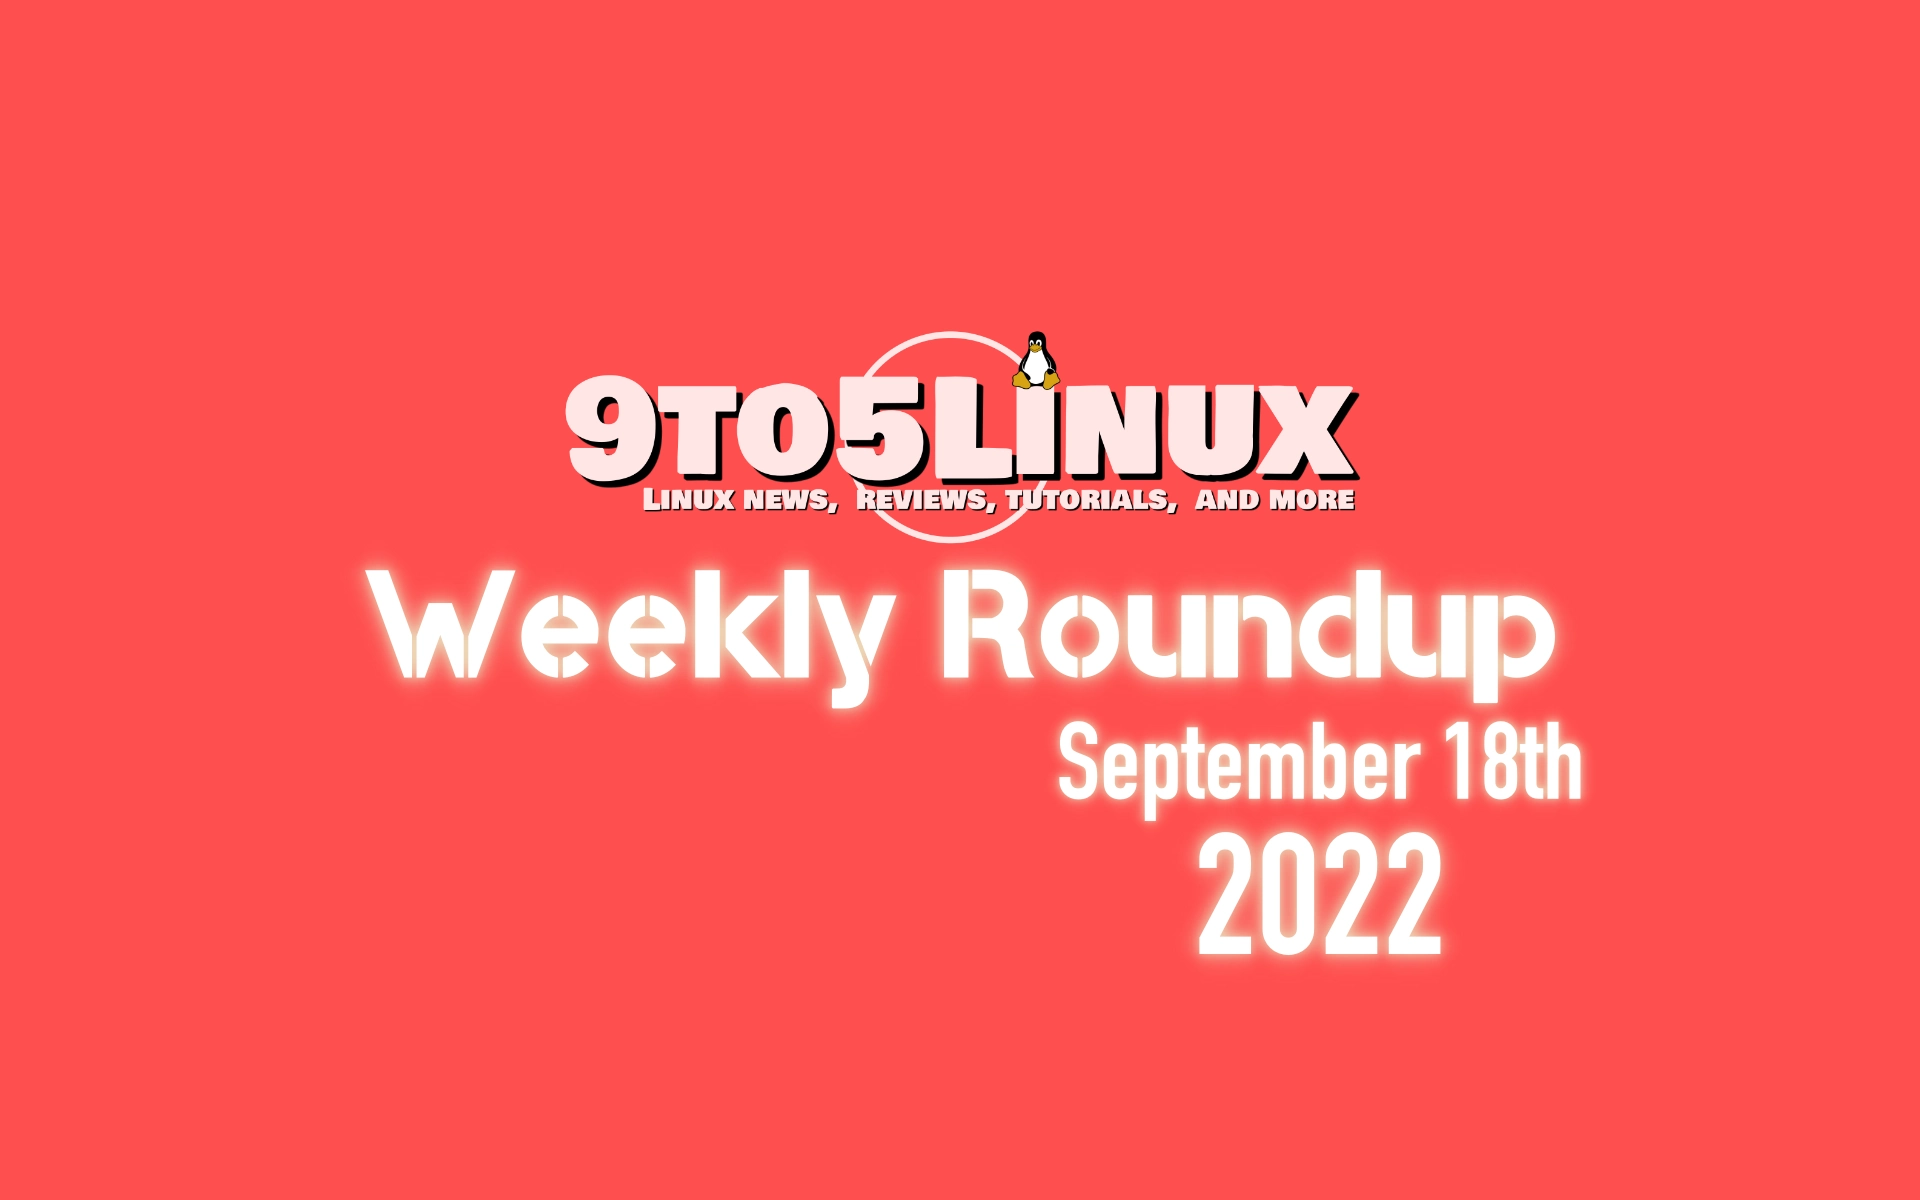 9to5Linux Weekly Roundup: September 18th, 2022